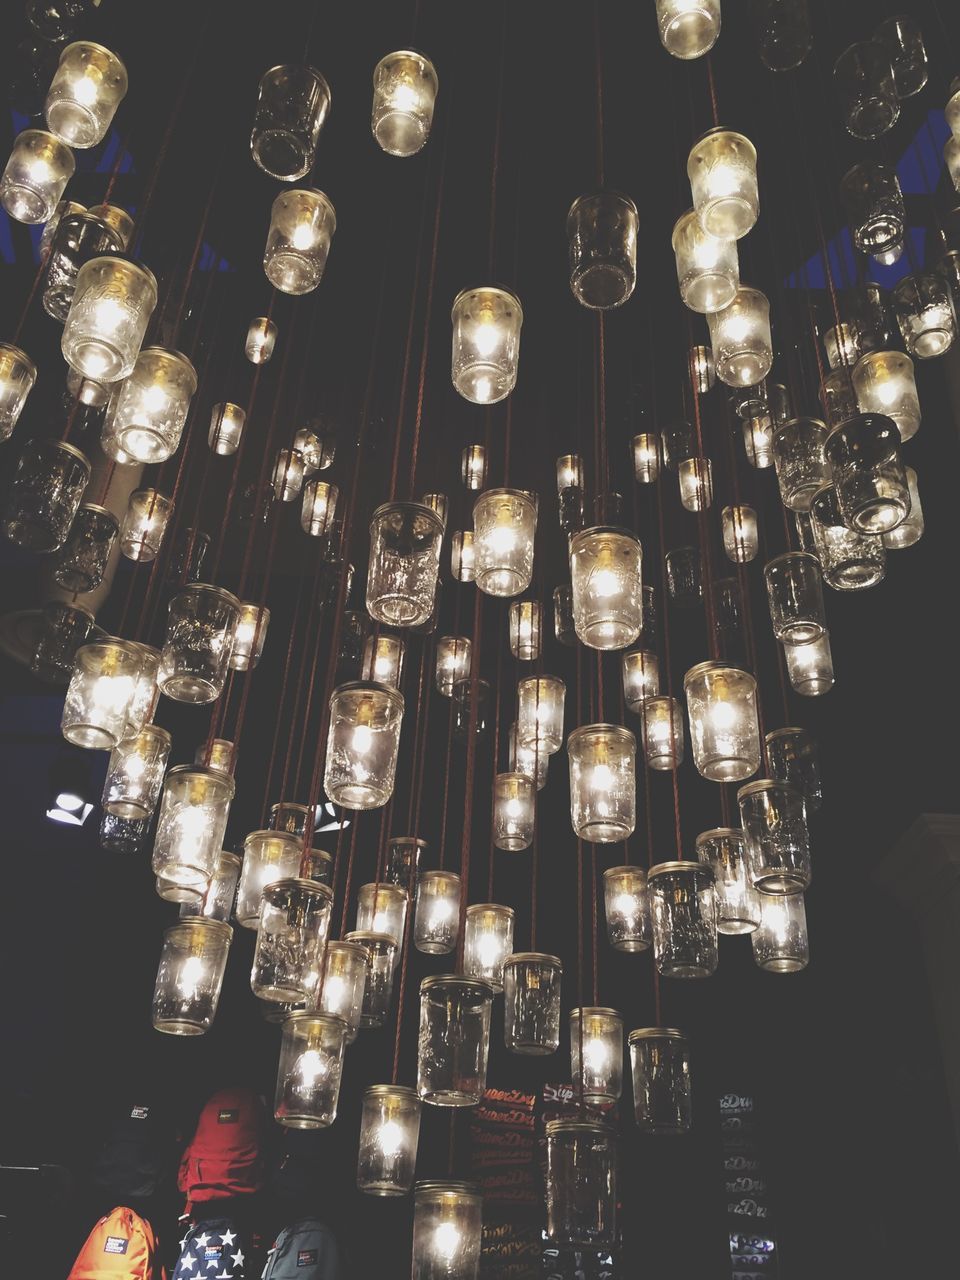 illuminated, indoors, lighting equipment, night, hanging, in a row, large group of objects, electricity, decoration, light - natural phenomenon, abundance, glowing, repetition, arrangement, low angle view, luxury, chandelier, order, lit, electric light